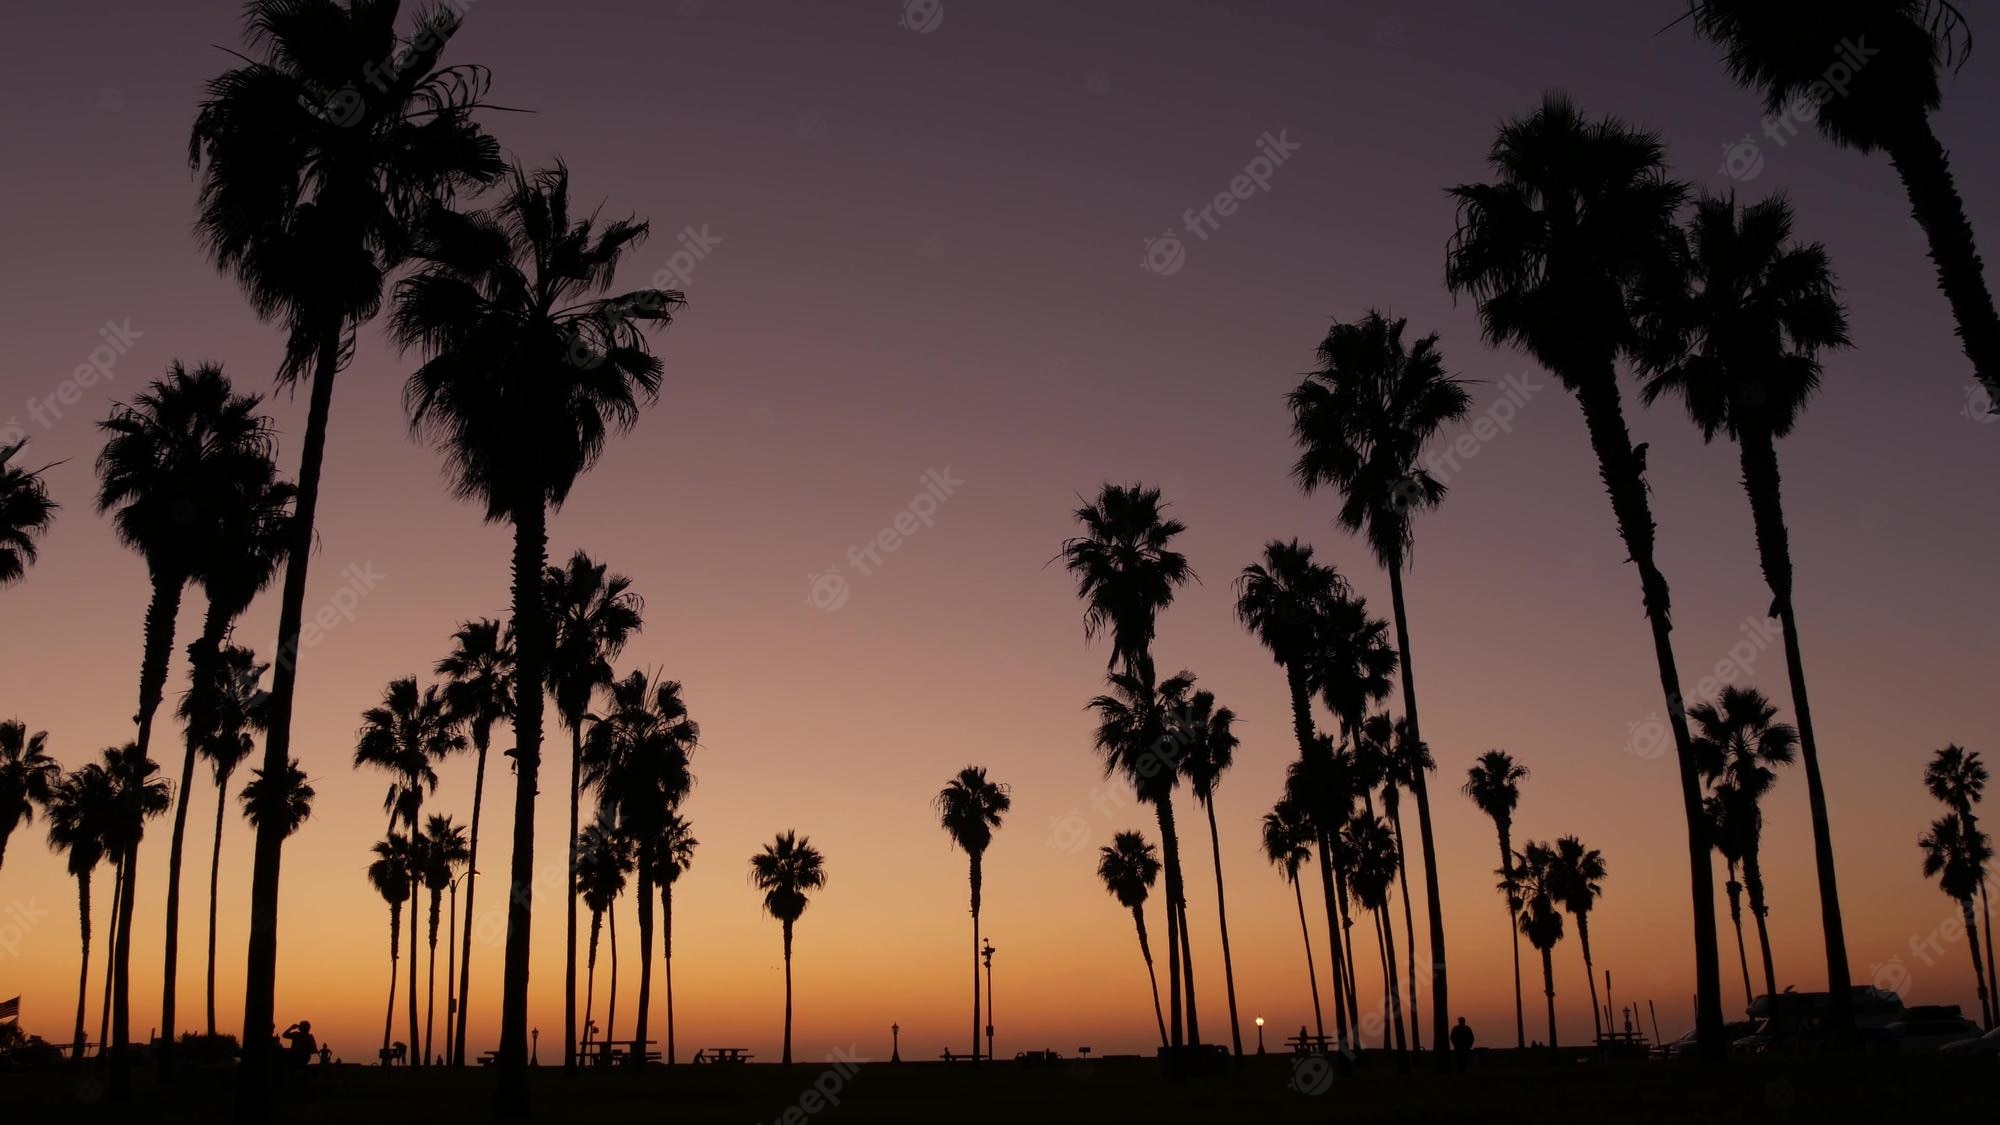 Premium Photo. Silhouettes of people and palm trees on beach at sunset california coast usa